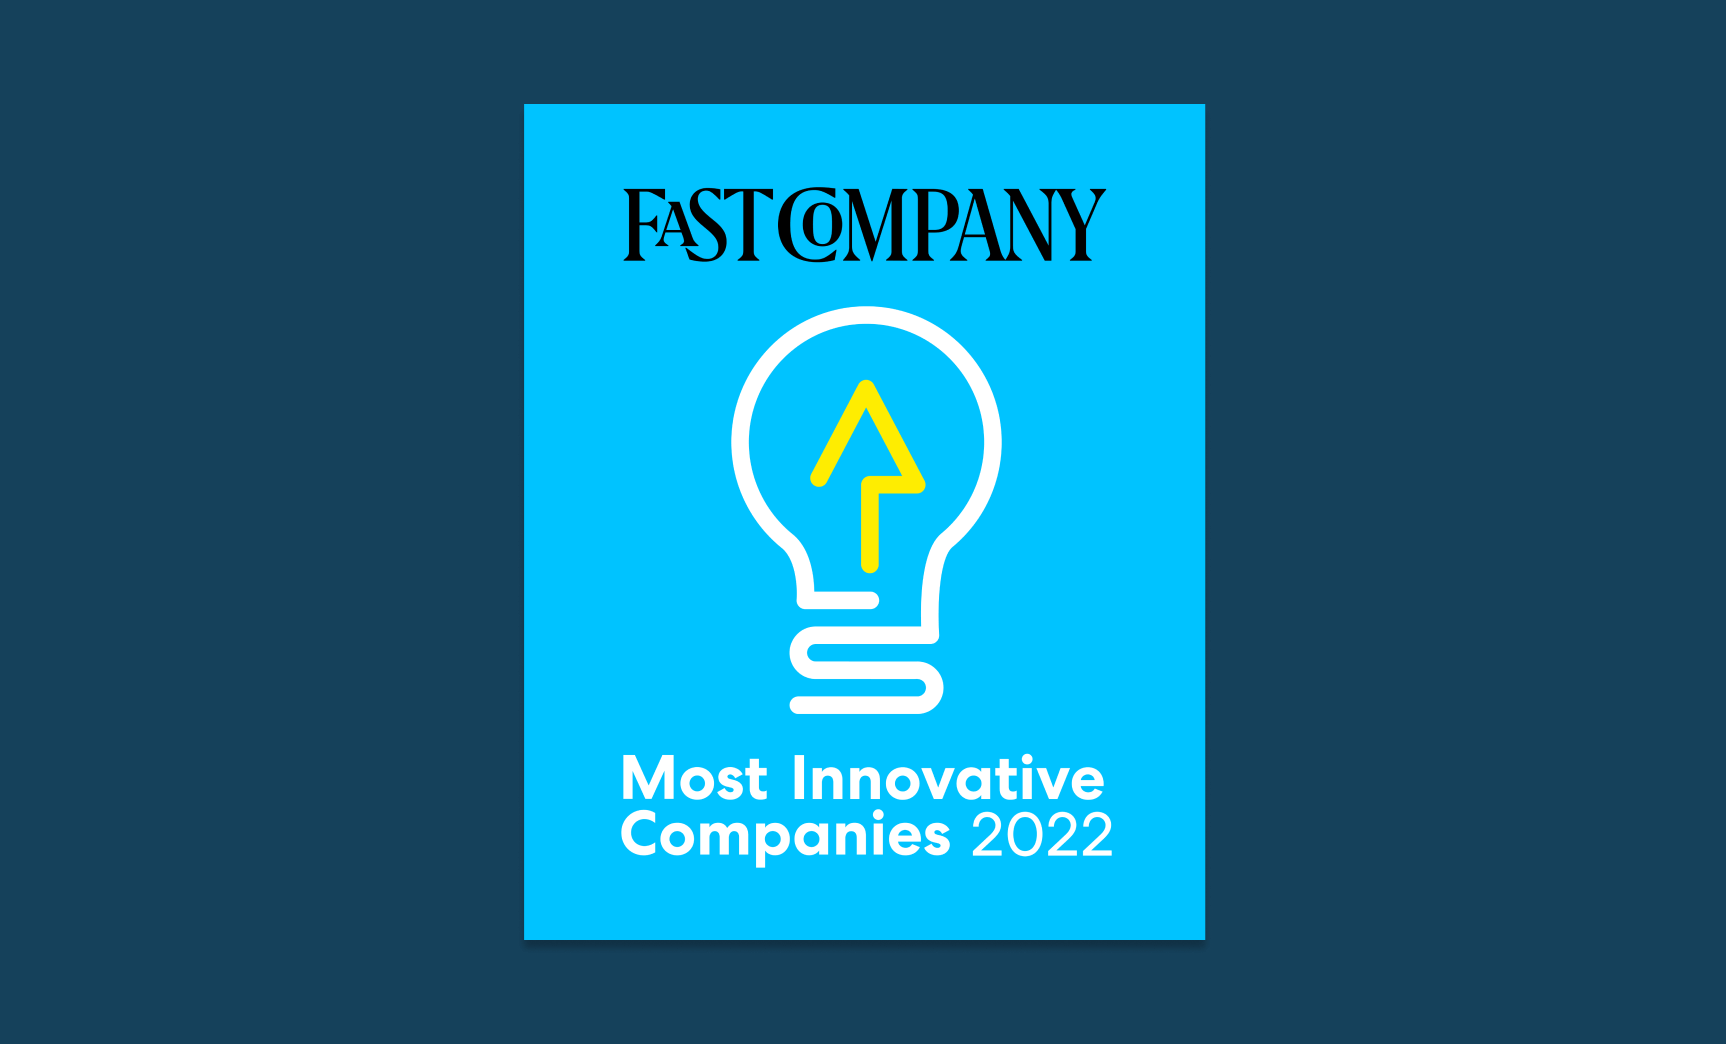 Carrot named to Fast Company’s annual list of the World’s 50 Most Innovative Companies for 2022